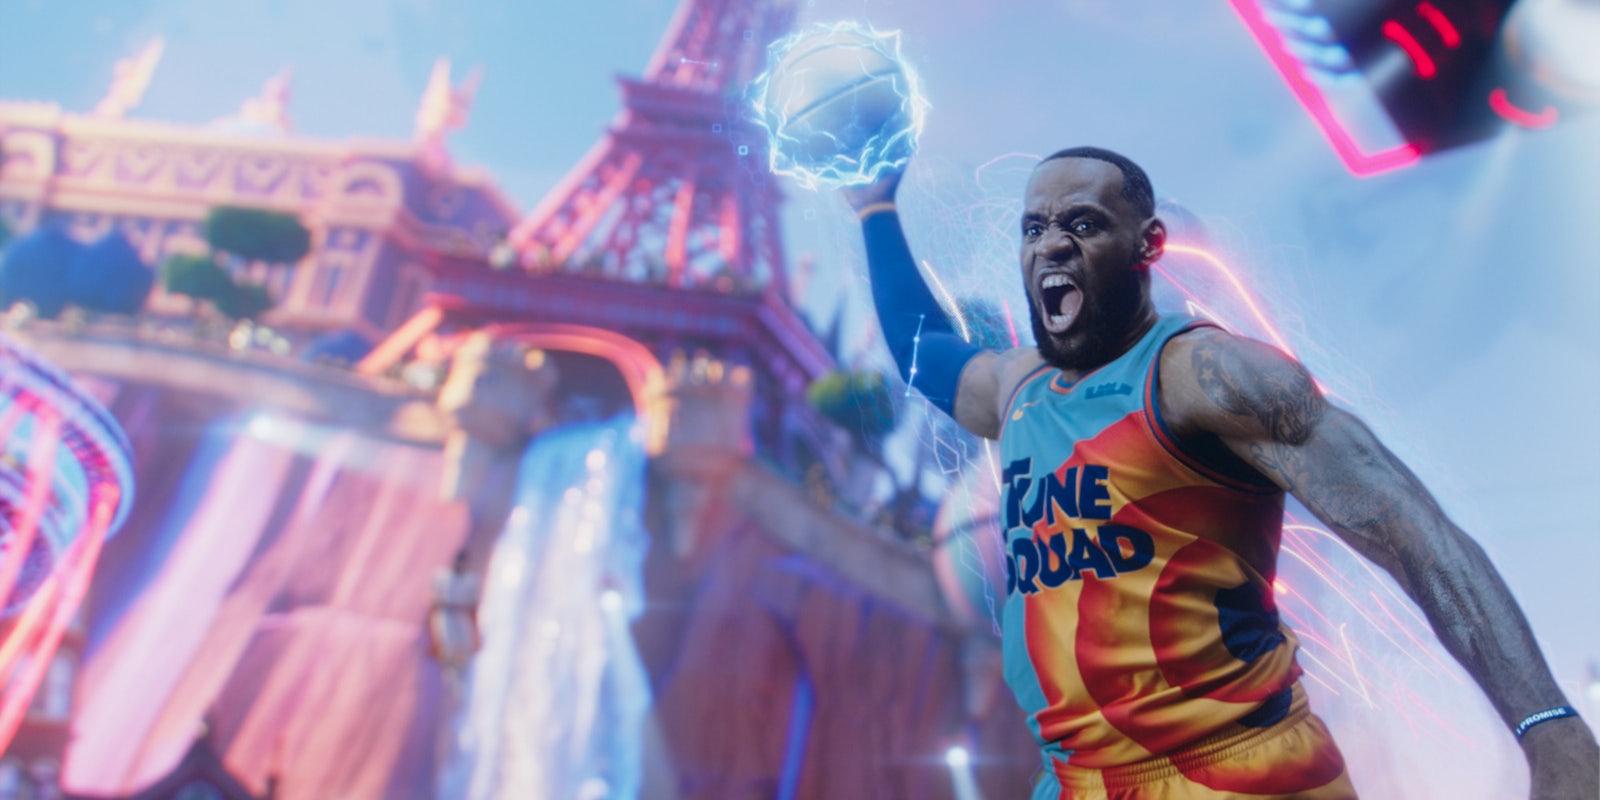 lebron james dunking in space jam a new legacy